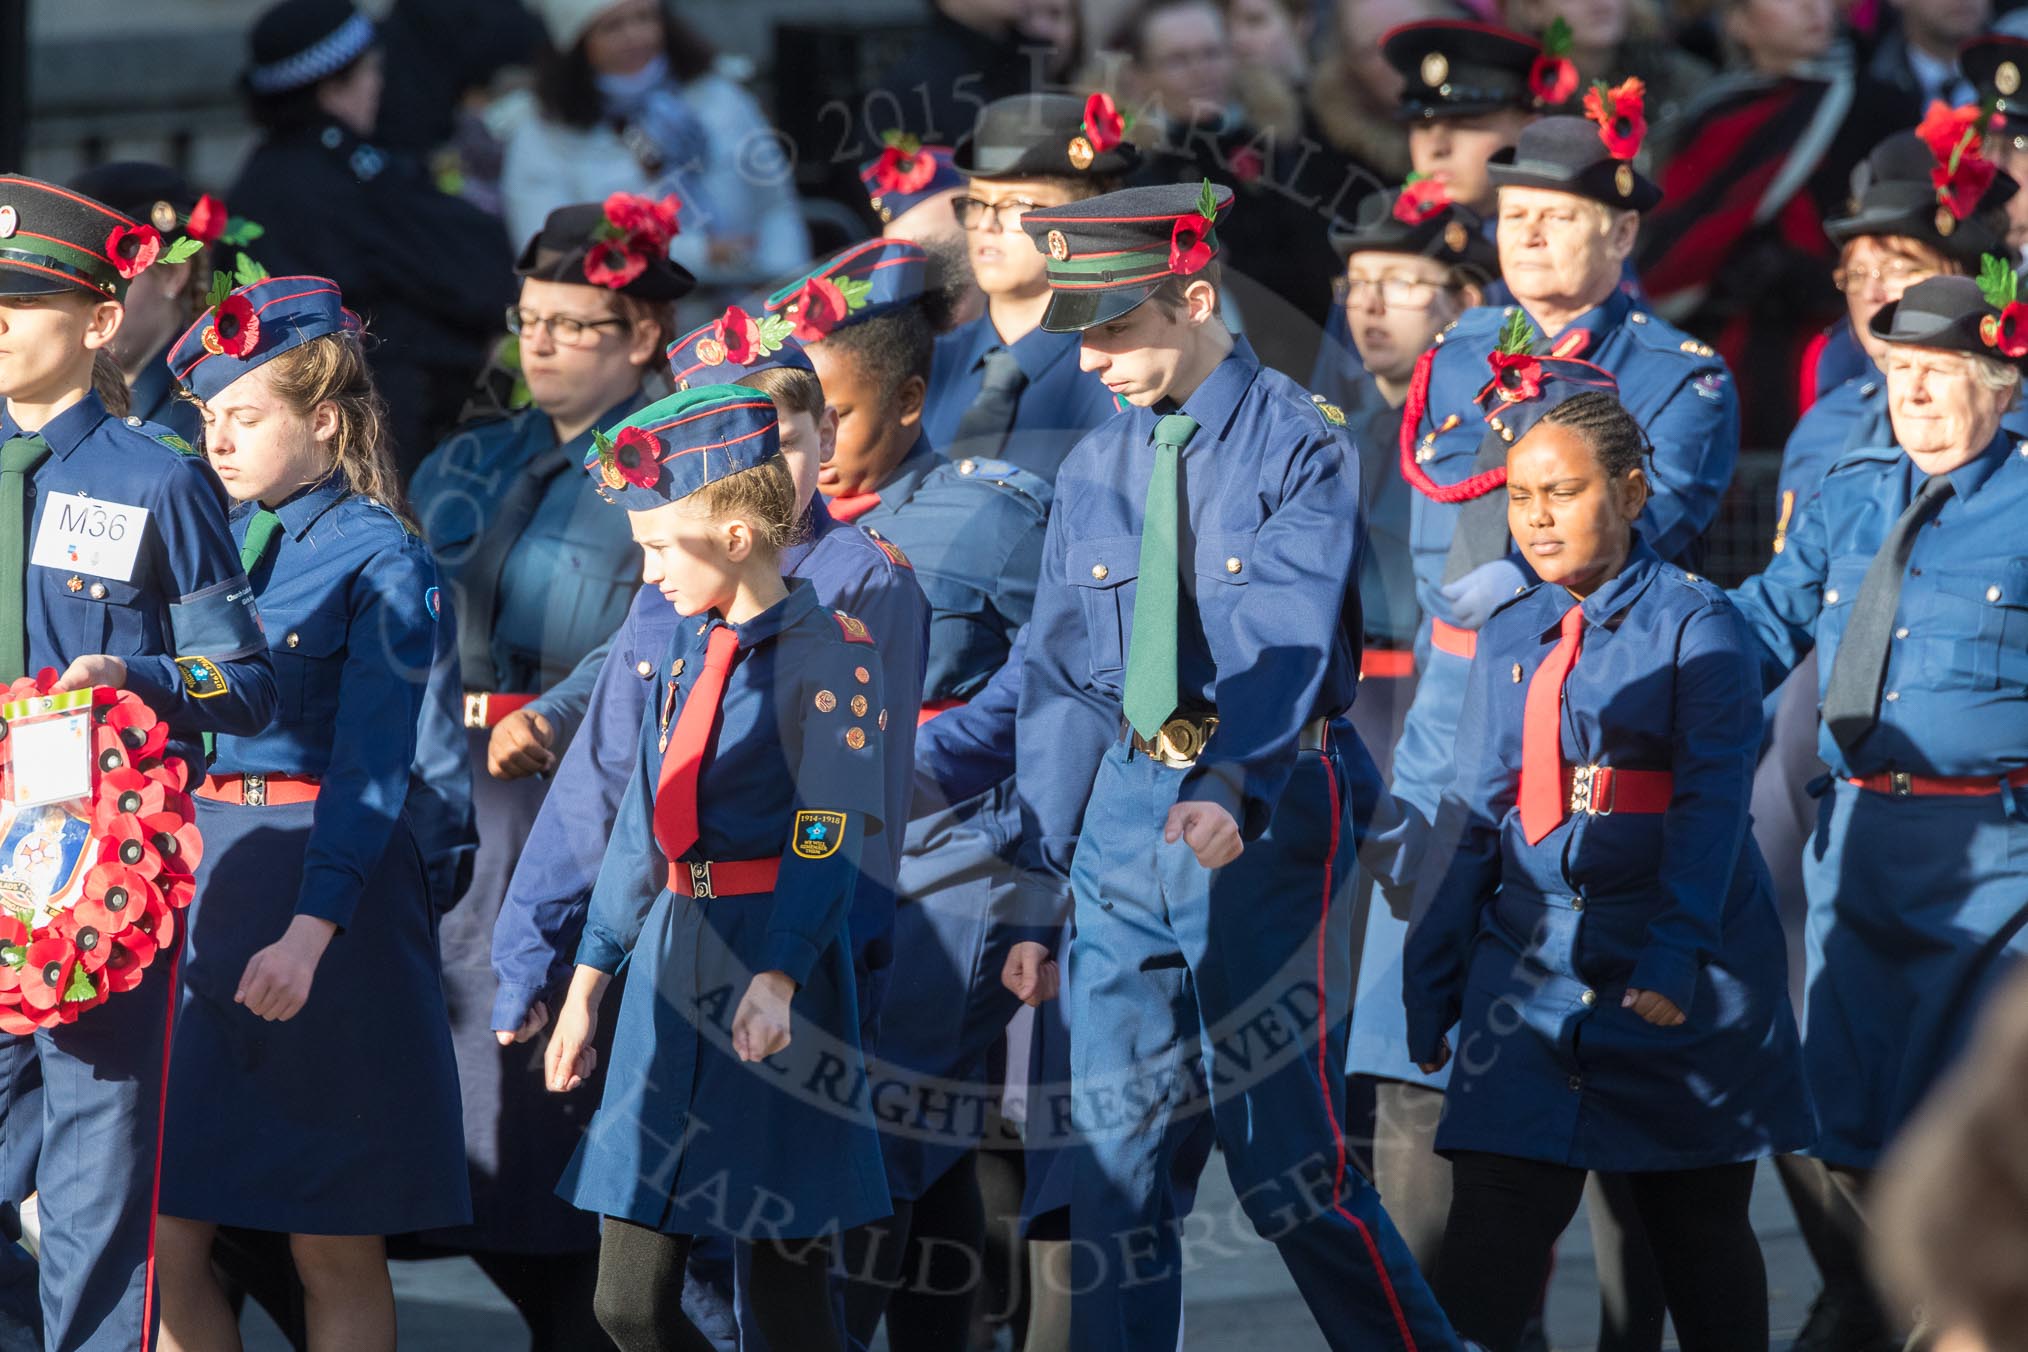 March Past, Remembrance Sunday at the Cenotaph 2016: M36 Church Lads & Church Girls Brigade.
Cenotaph, Whitehall, London SW1,
London,
Greater London,
United Kingdom,
on 13 November 2016 at 13:19, image #2886